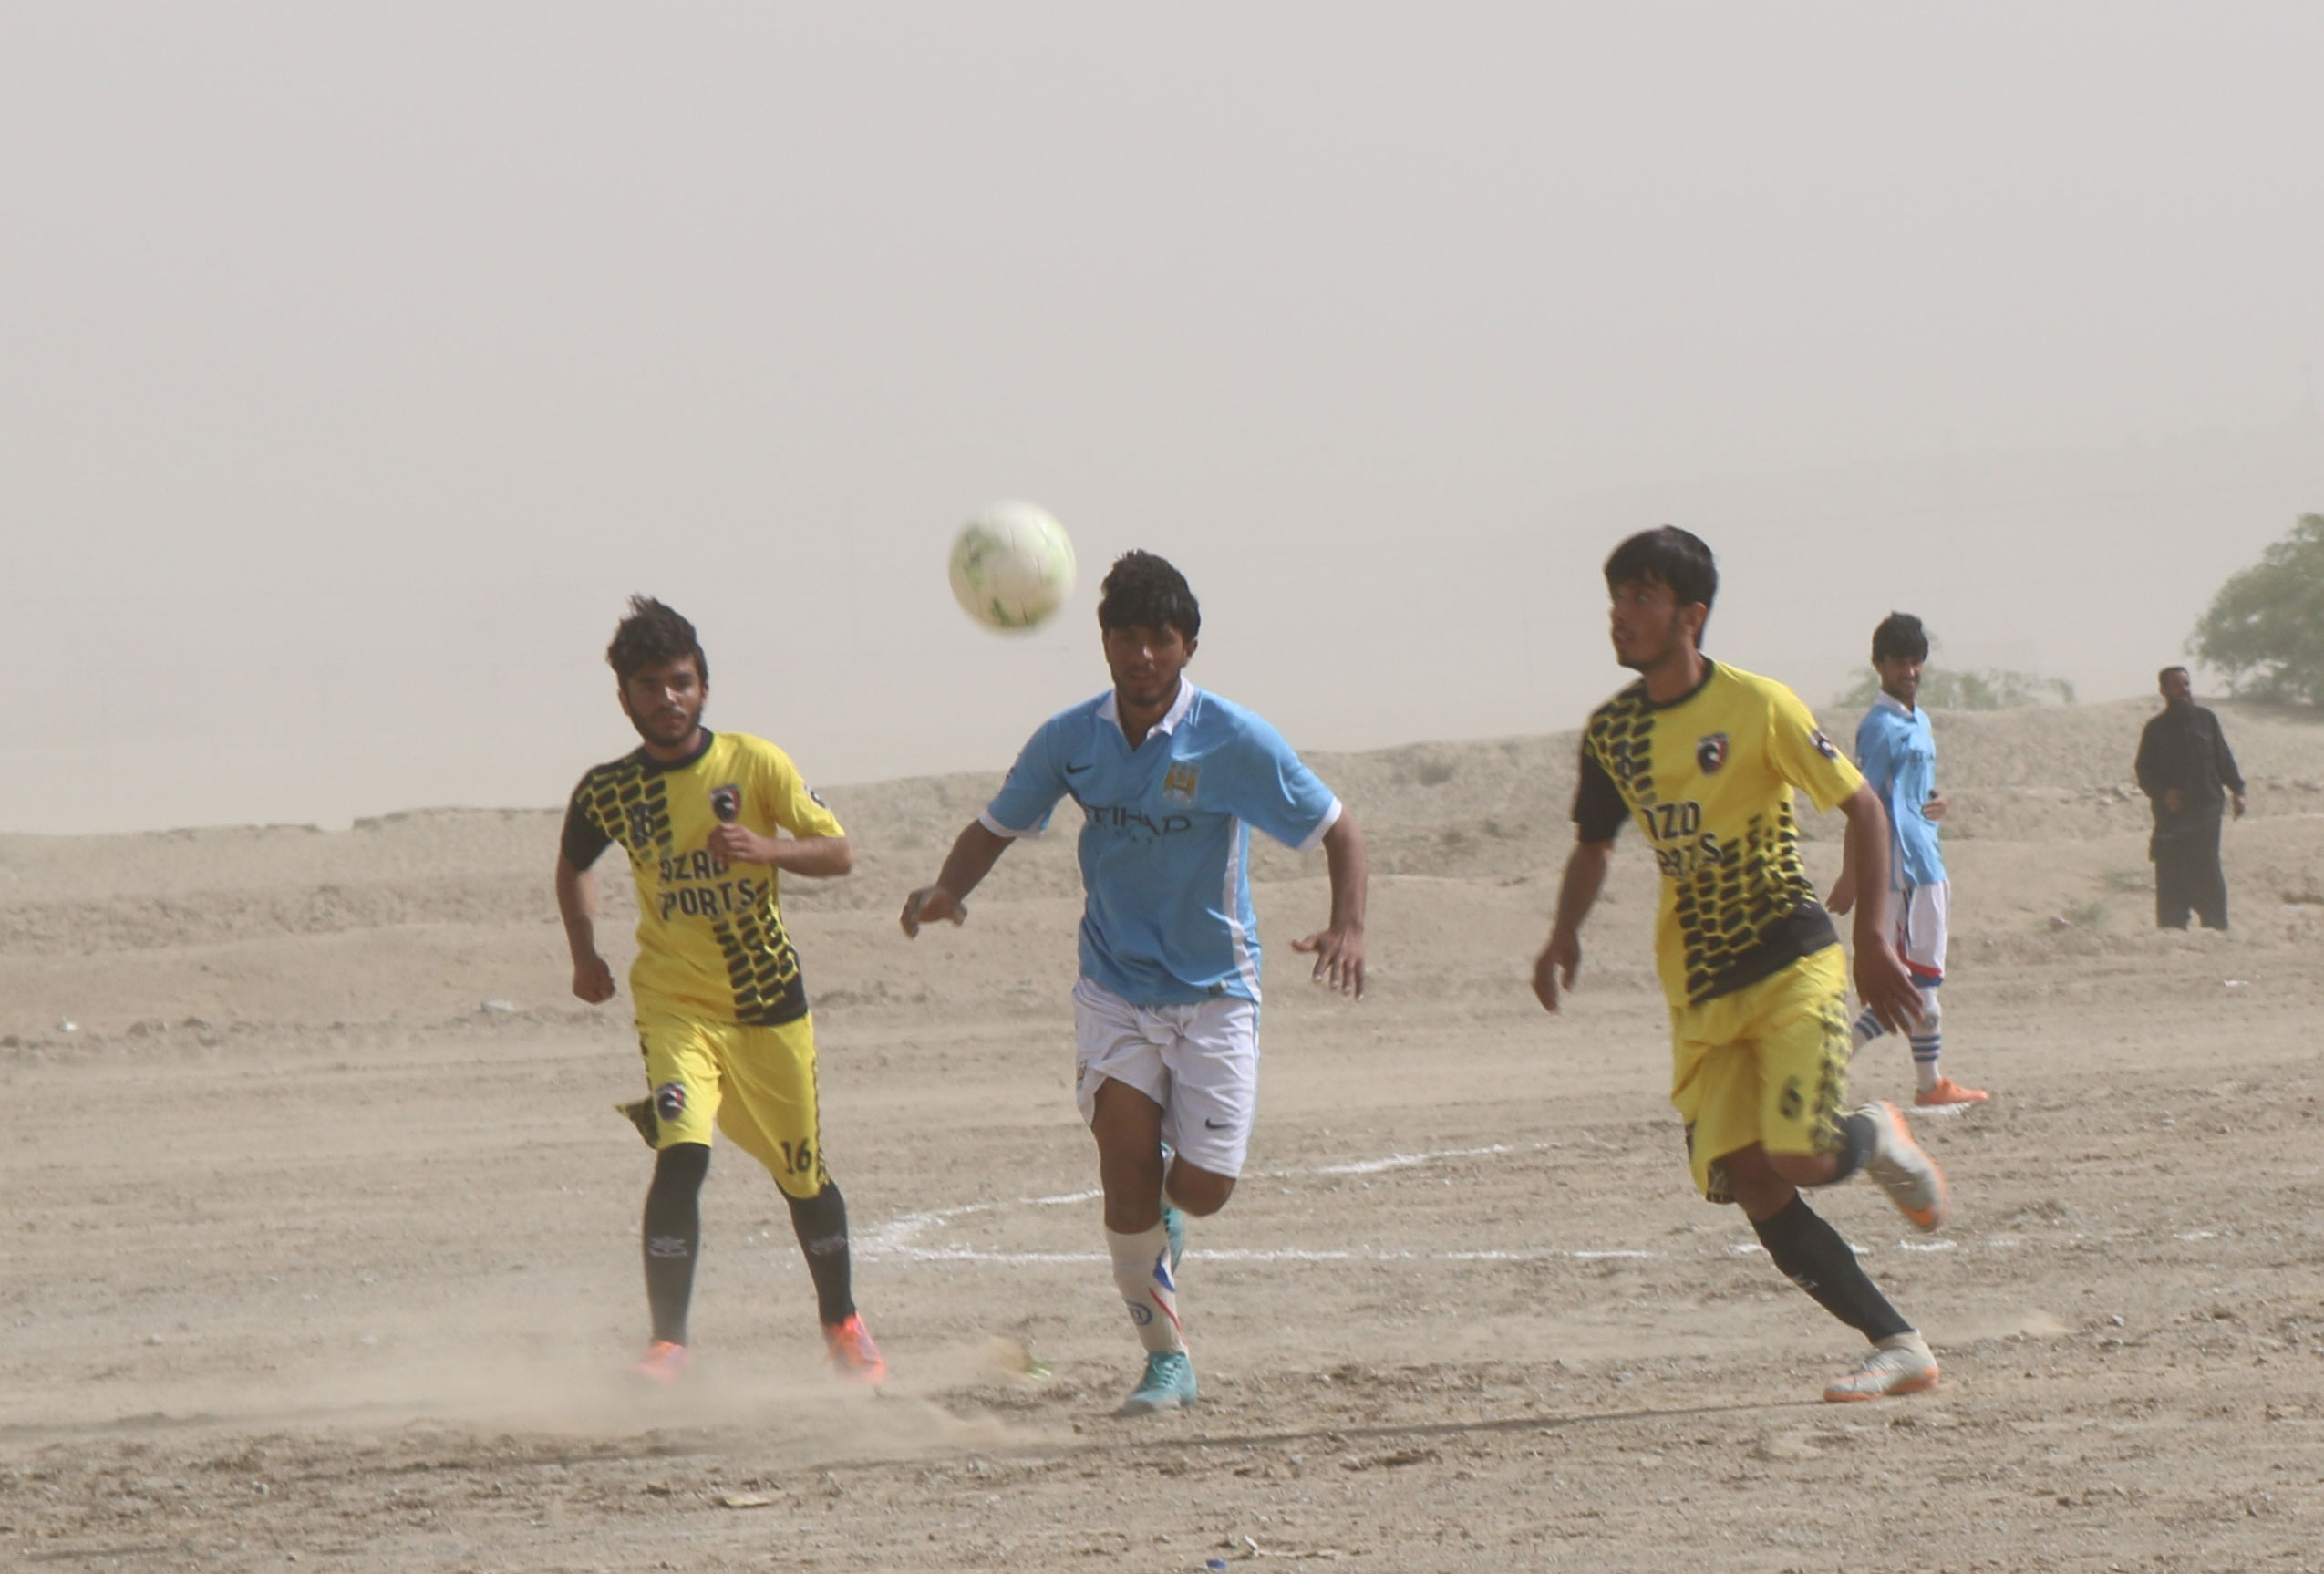 Ufone Balochistan Football Cup: Teams battle it out in Noshki for a place in the Quarterfinals